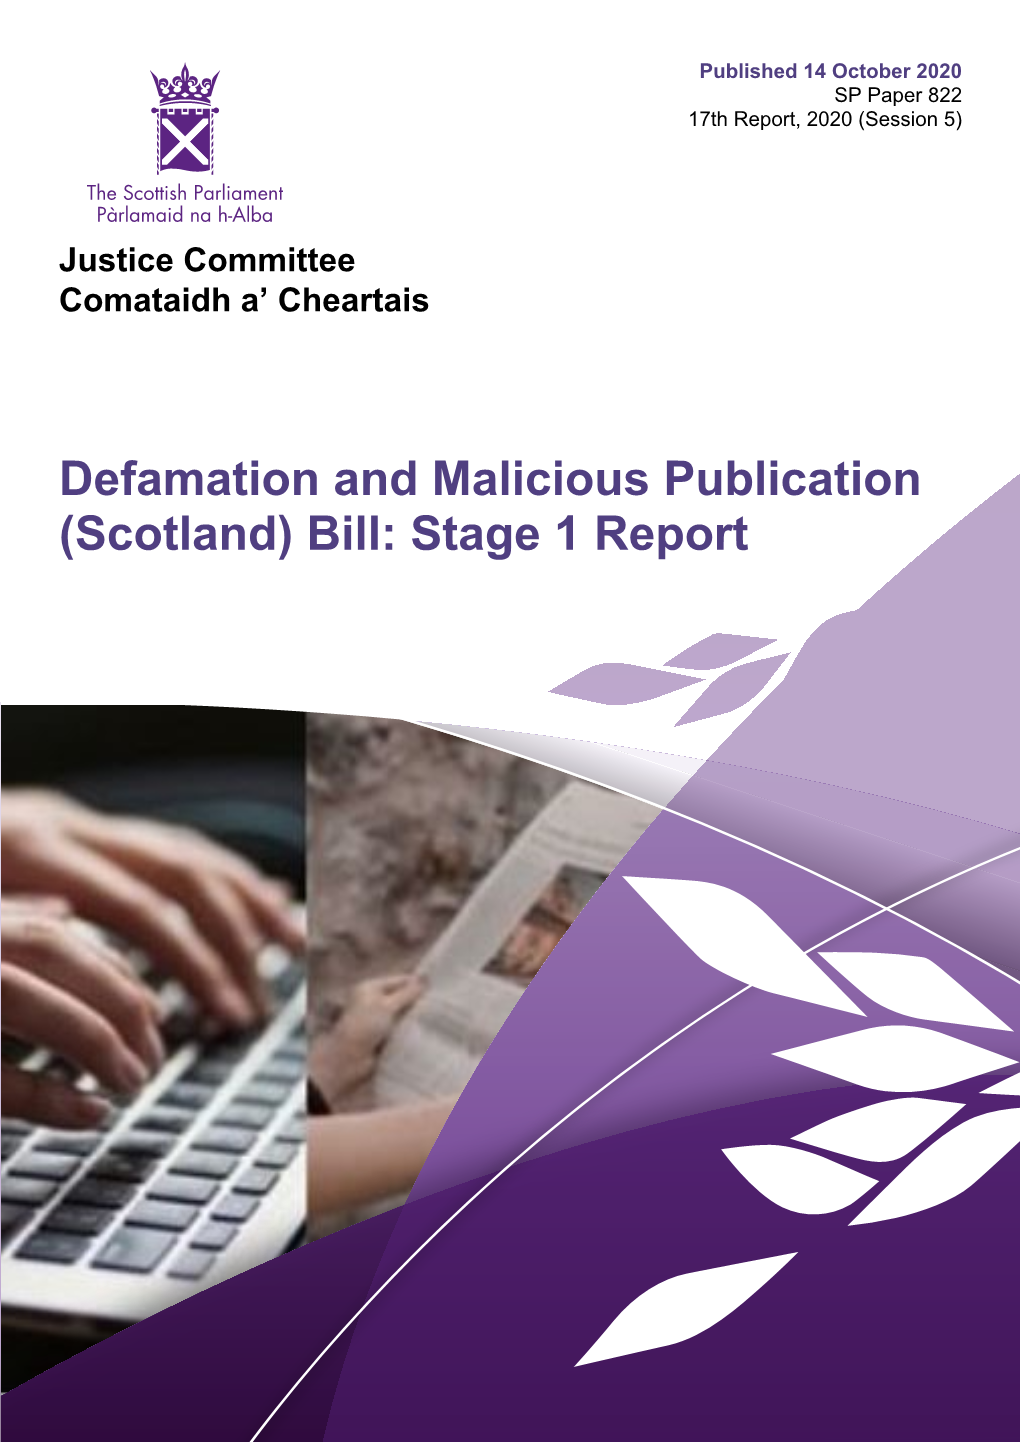 Defamation and Malicious Publication (Scotland) Bill: Stage 1 Report Published in Scotland by the Scottish Parliamentary Corporate Body